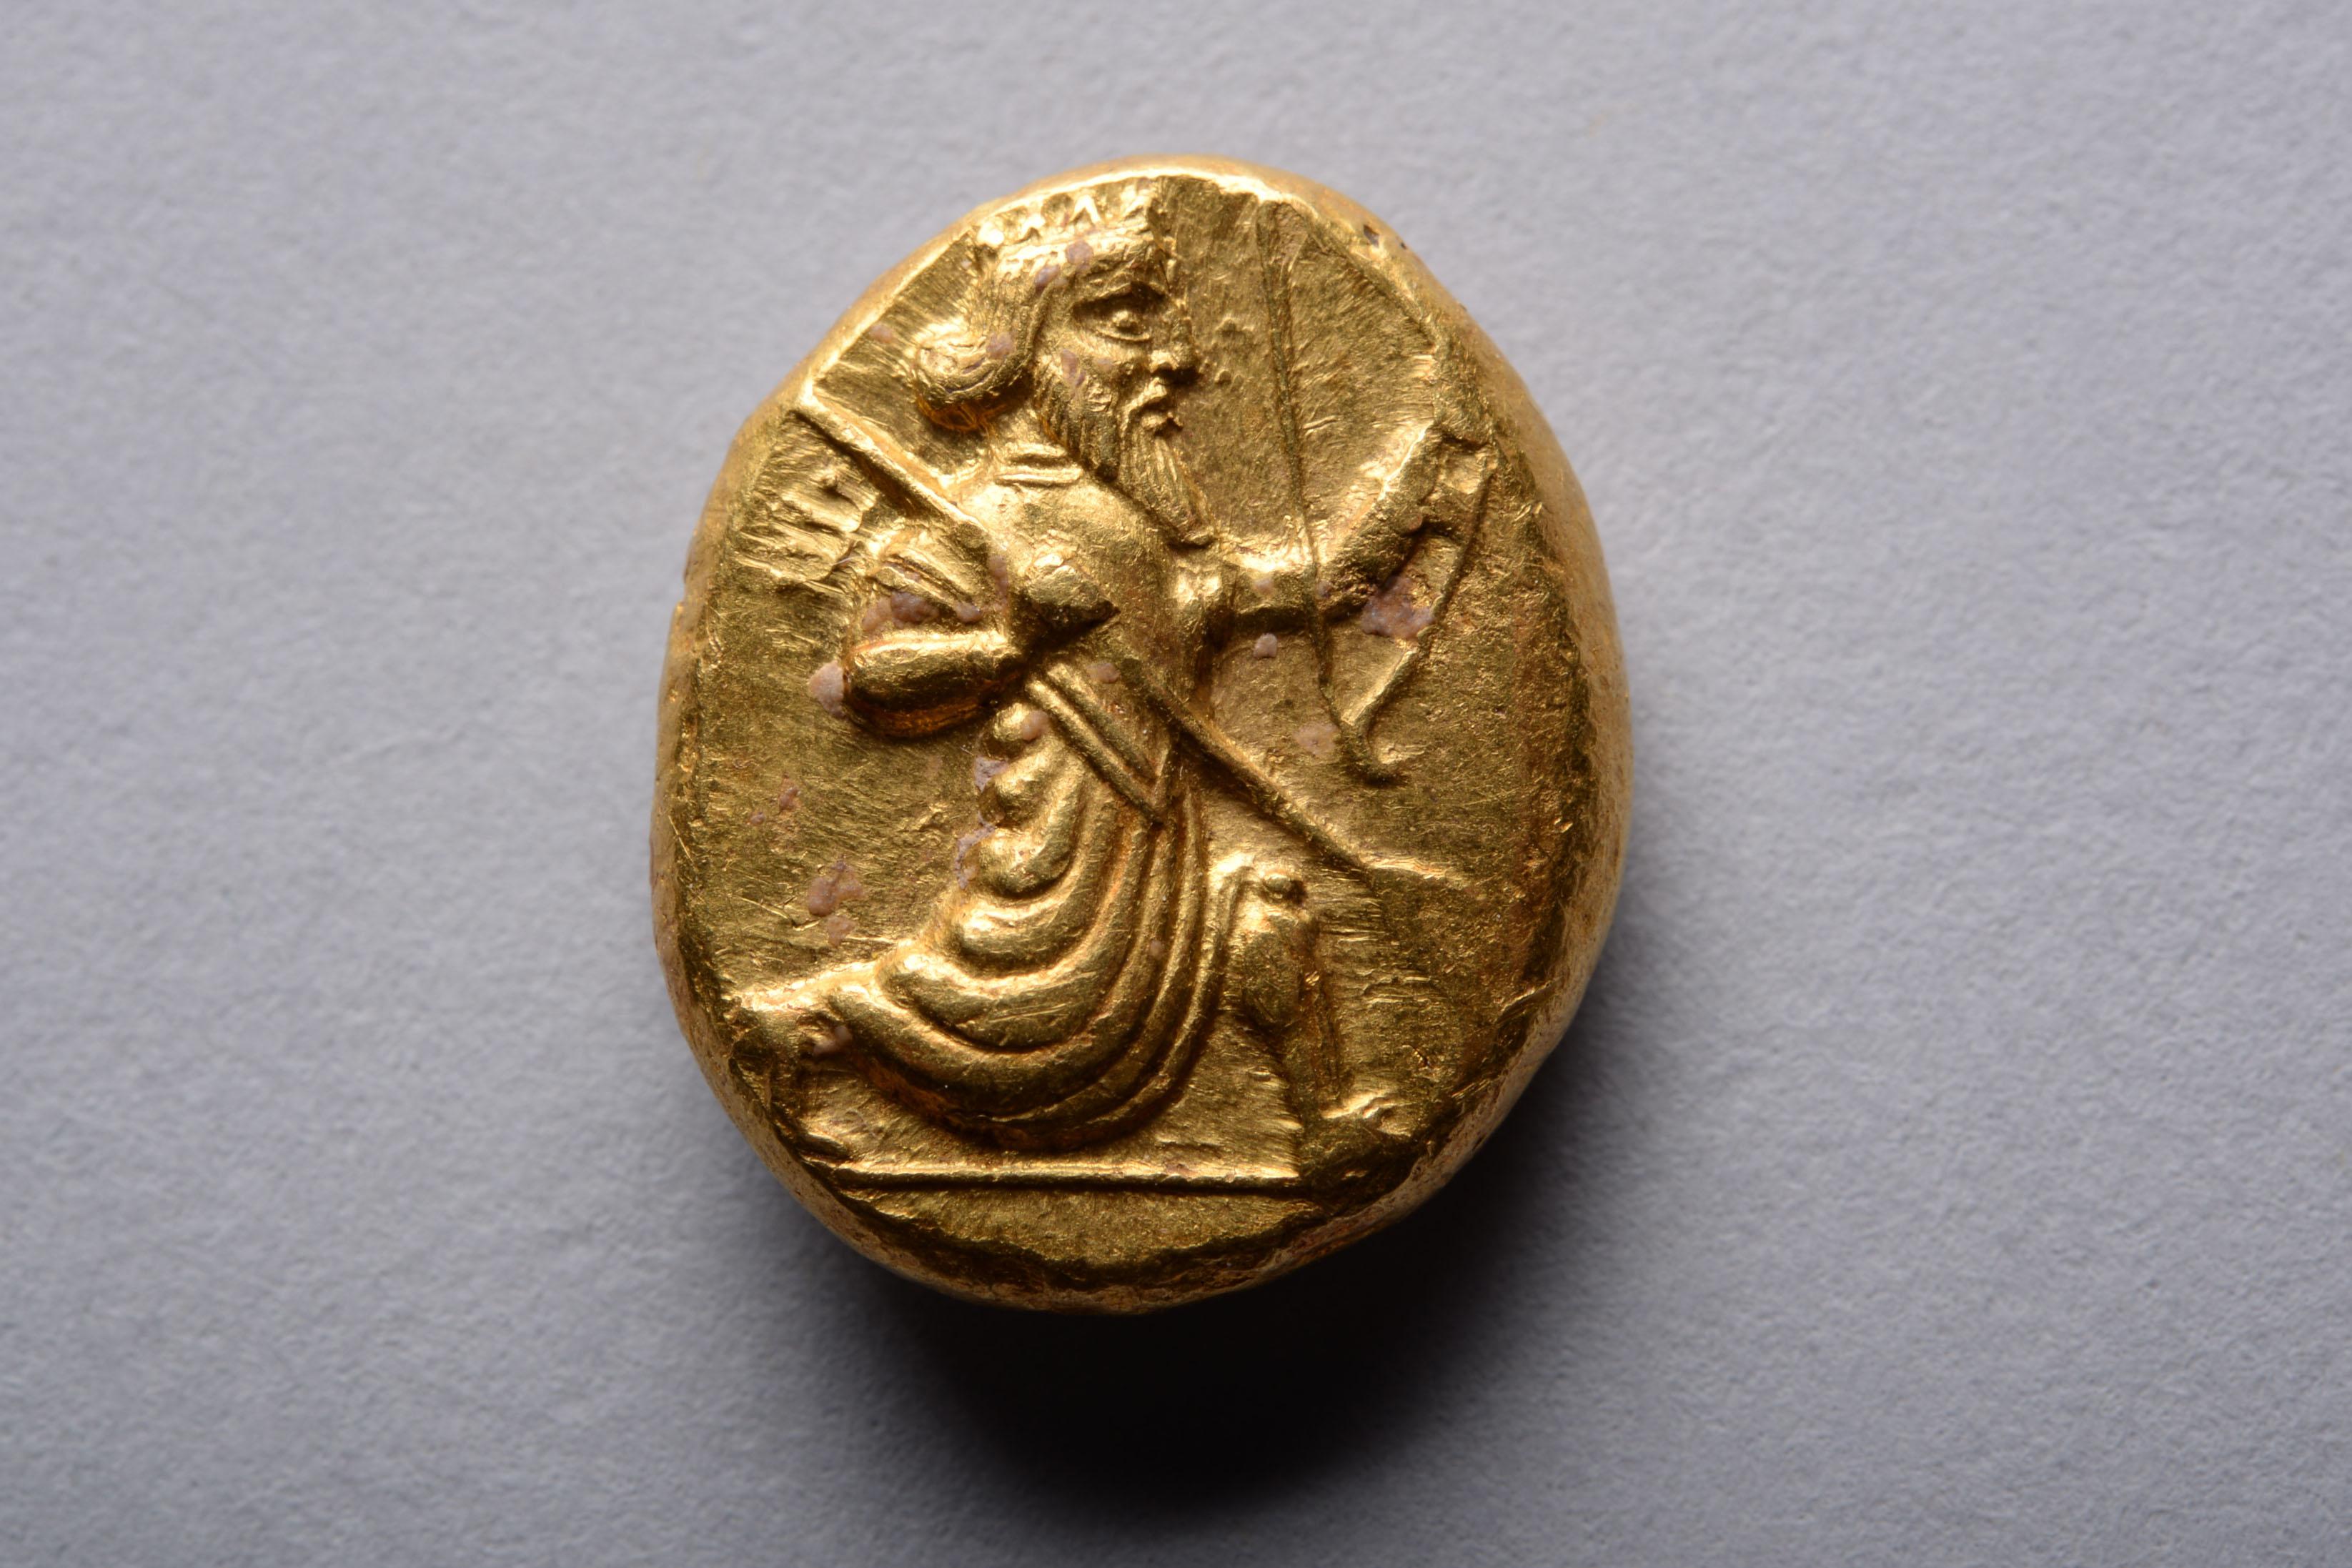 Unknown Still-Life Sculpture - Ancient Persian Gold Daric Coin